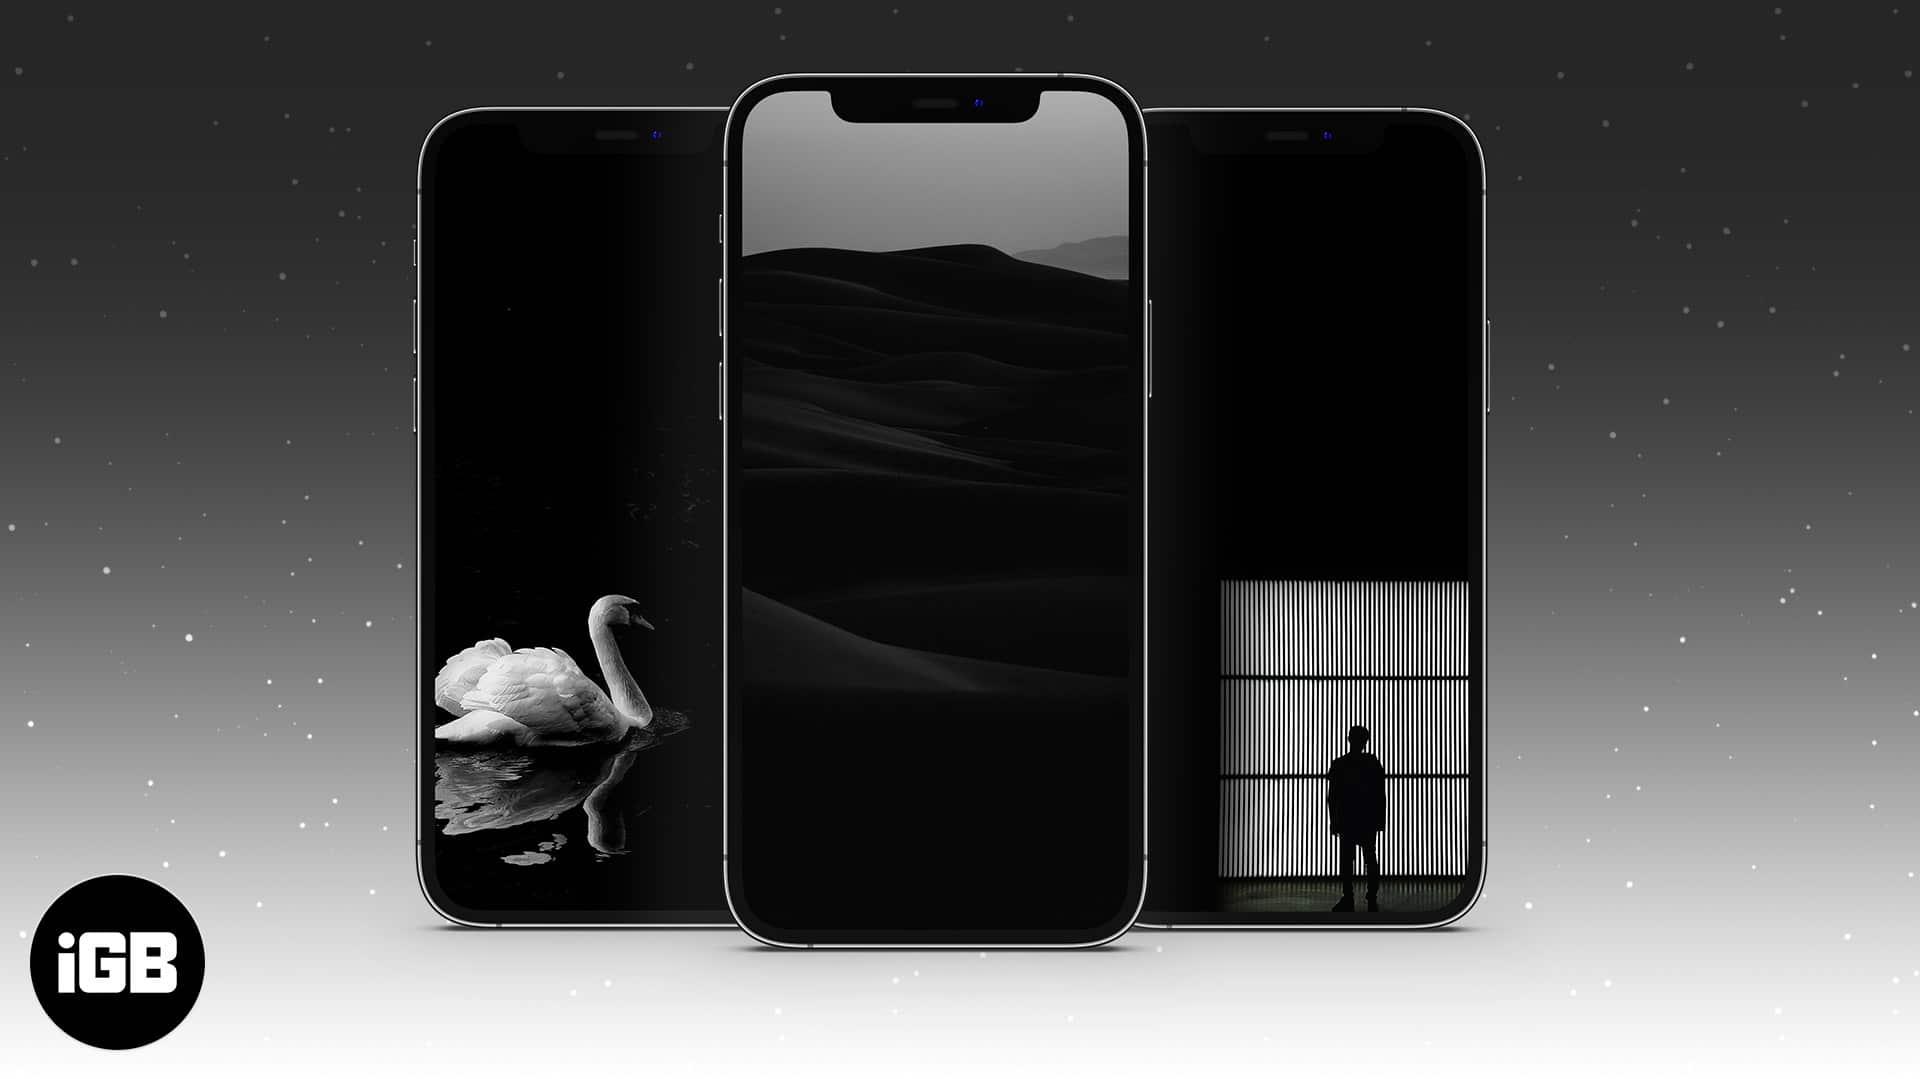 17 Beautiful black wallpapers for iPhone Free download   iGeeksBlog